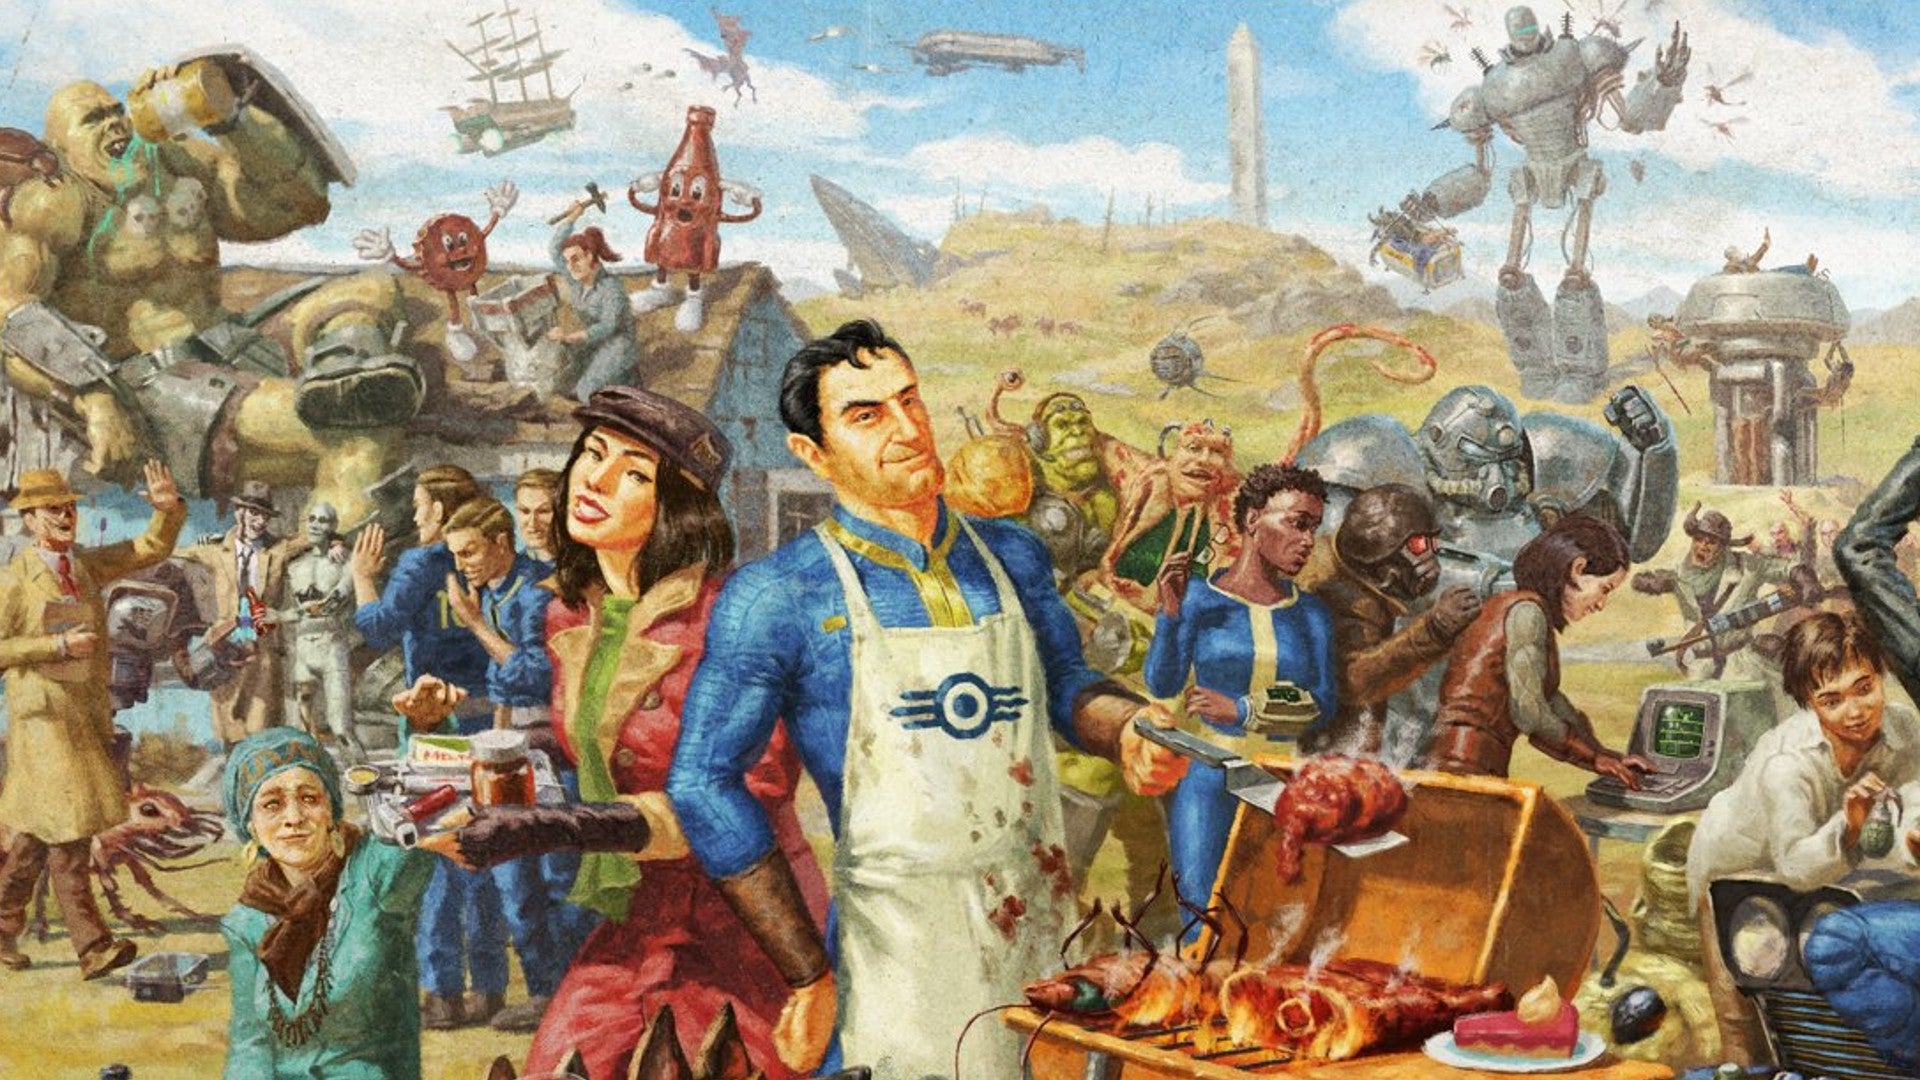 It's Fallout's 25th anniversary in October 2022, and Bethesda are running a free to play week in Fallout 76 to mark the occasion.